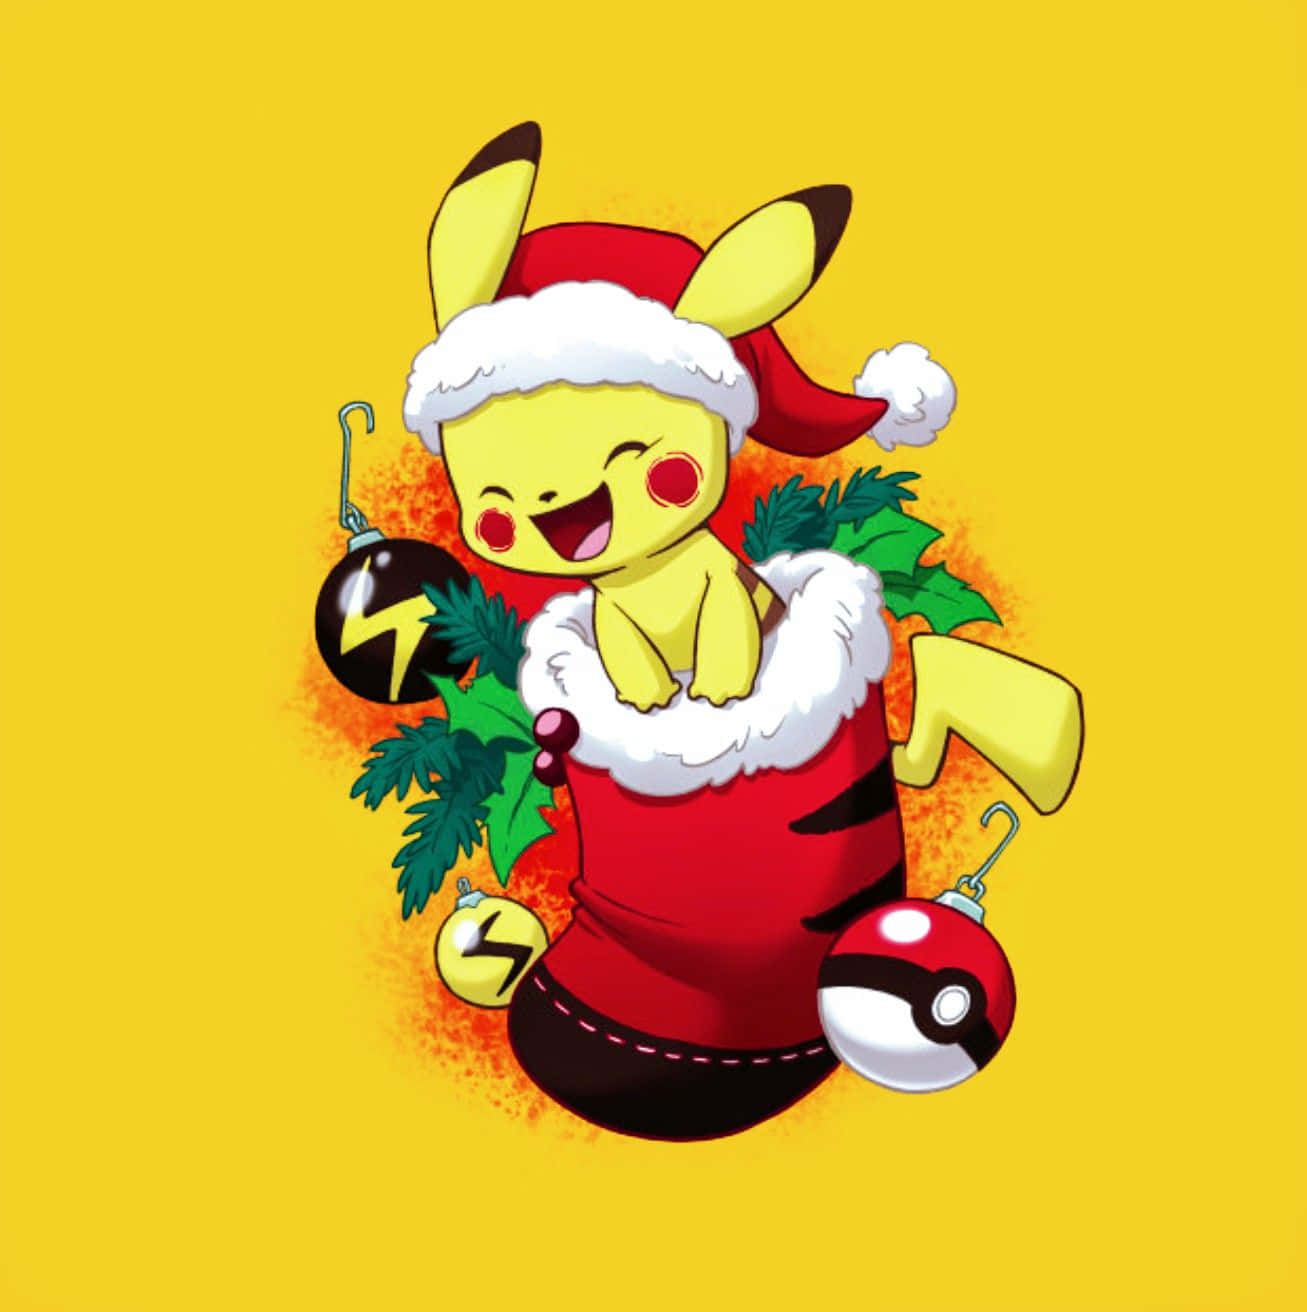 Pin by Cold Coin on Quick Saves  Pokemon, Christmas pokemon, Cute pokemon  wallpaper